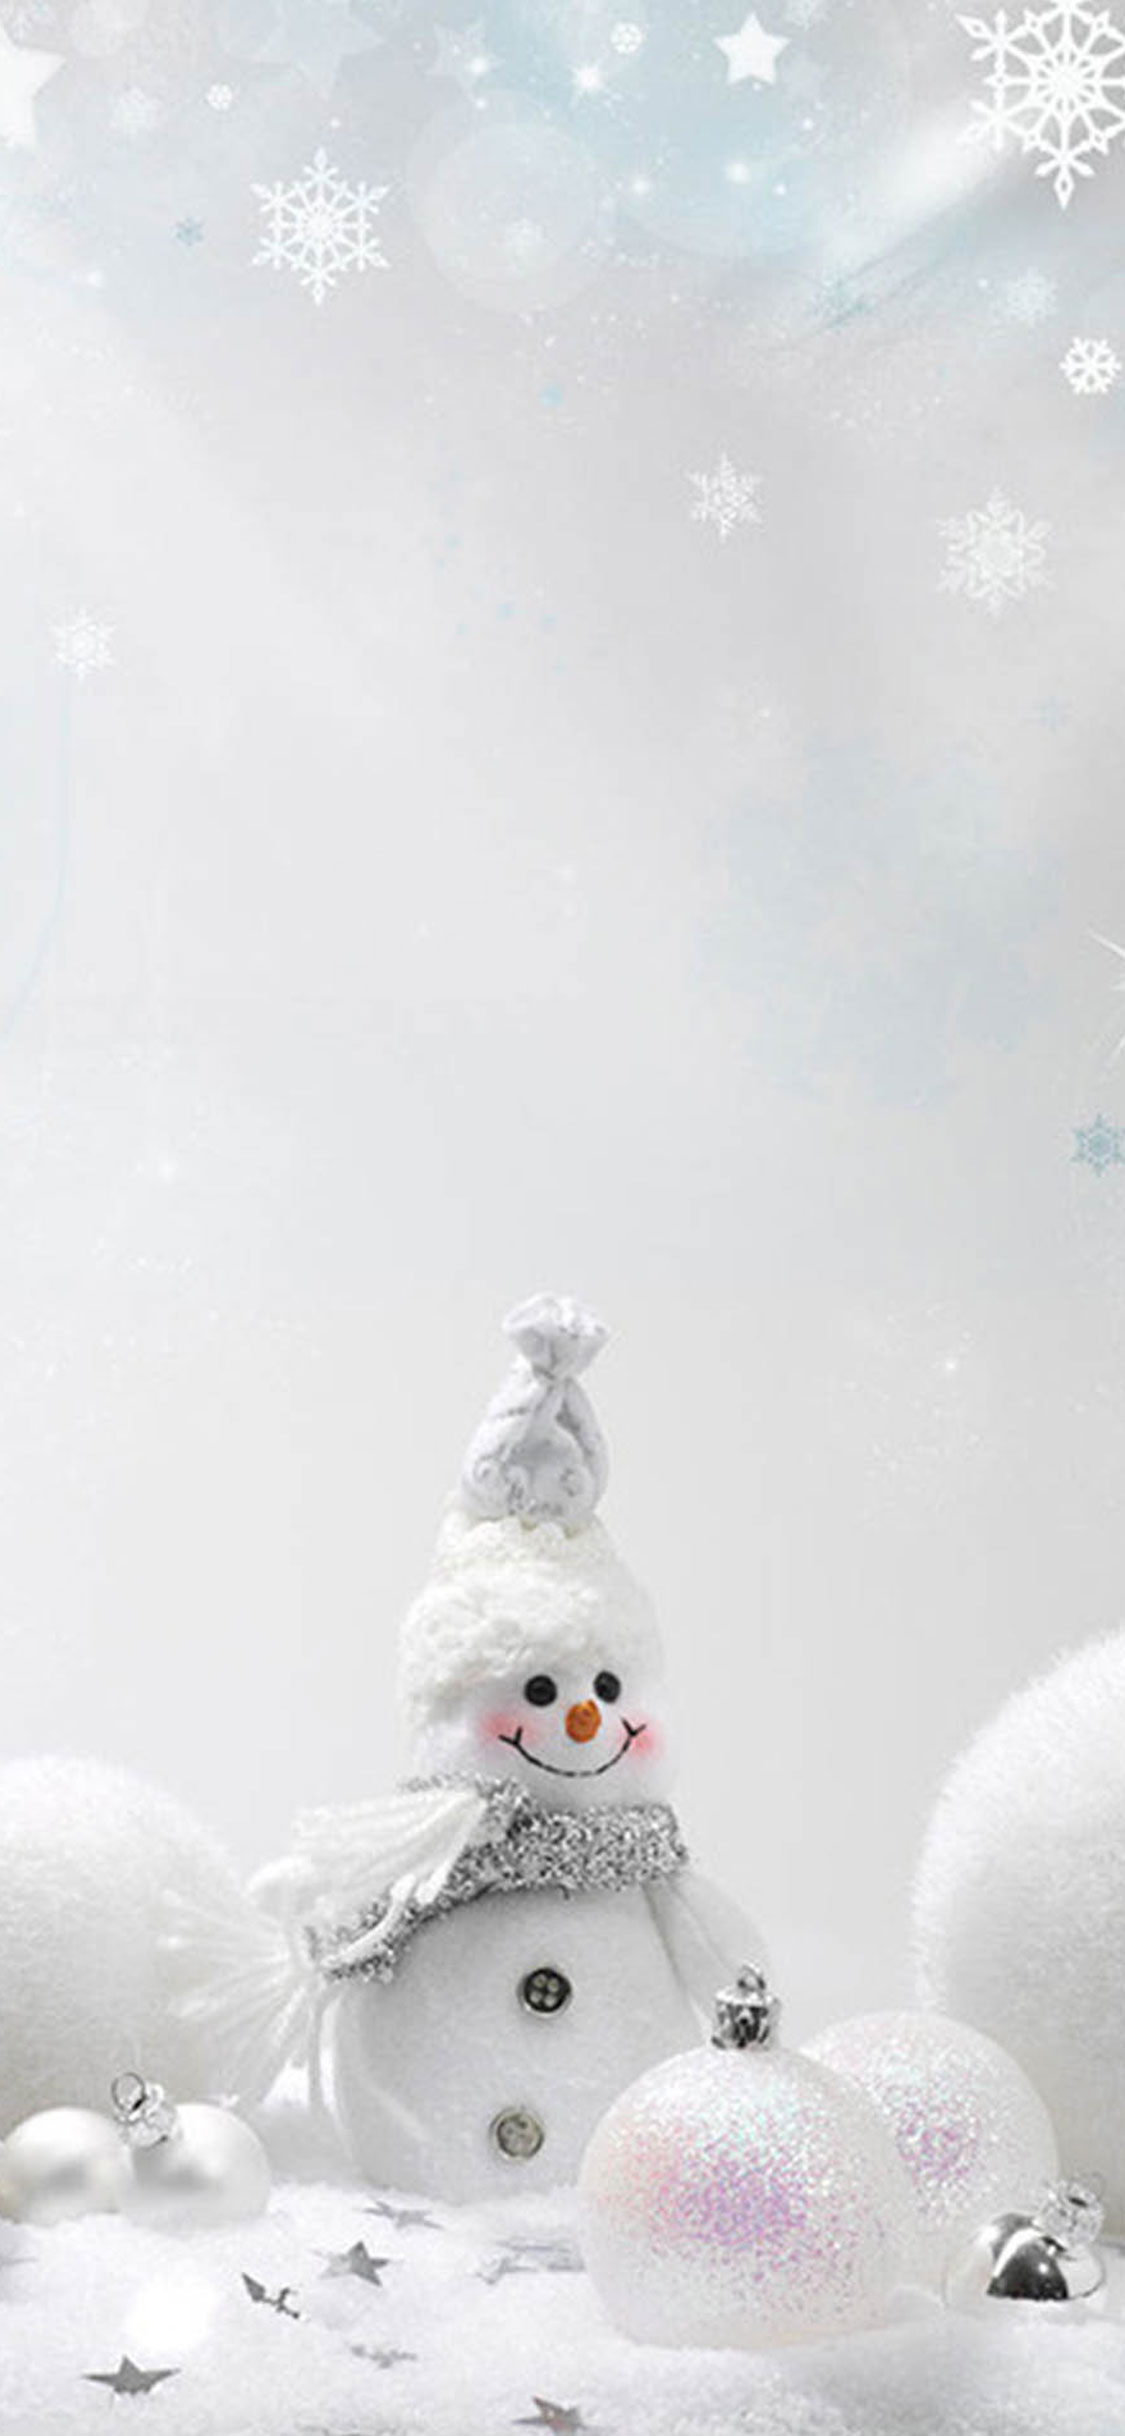 Snowman Covered With Snowflakes Wallpaper for iPhone 12 Pro